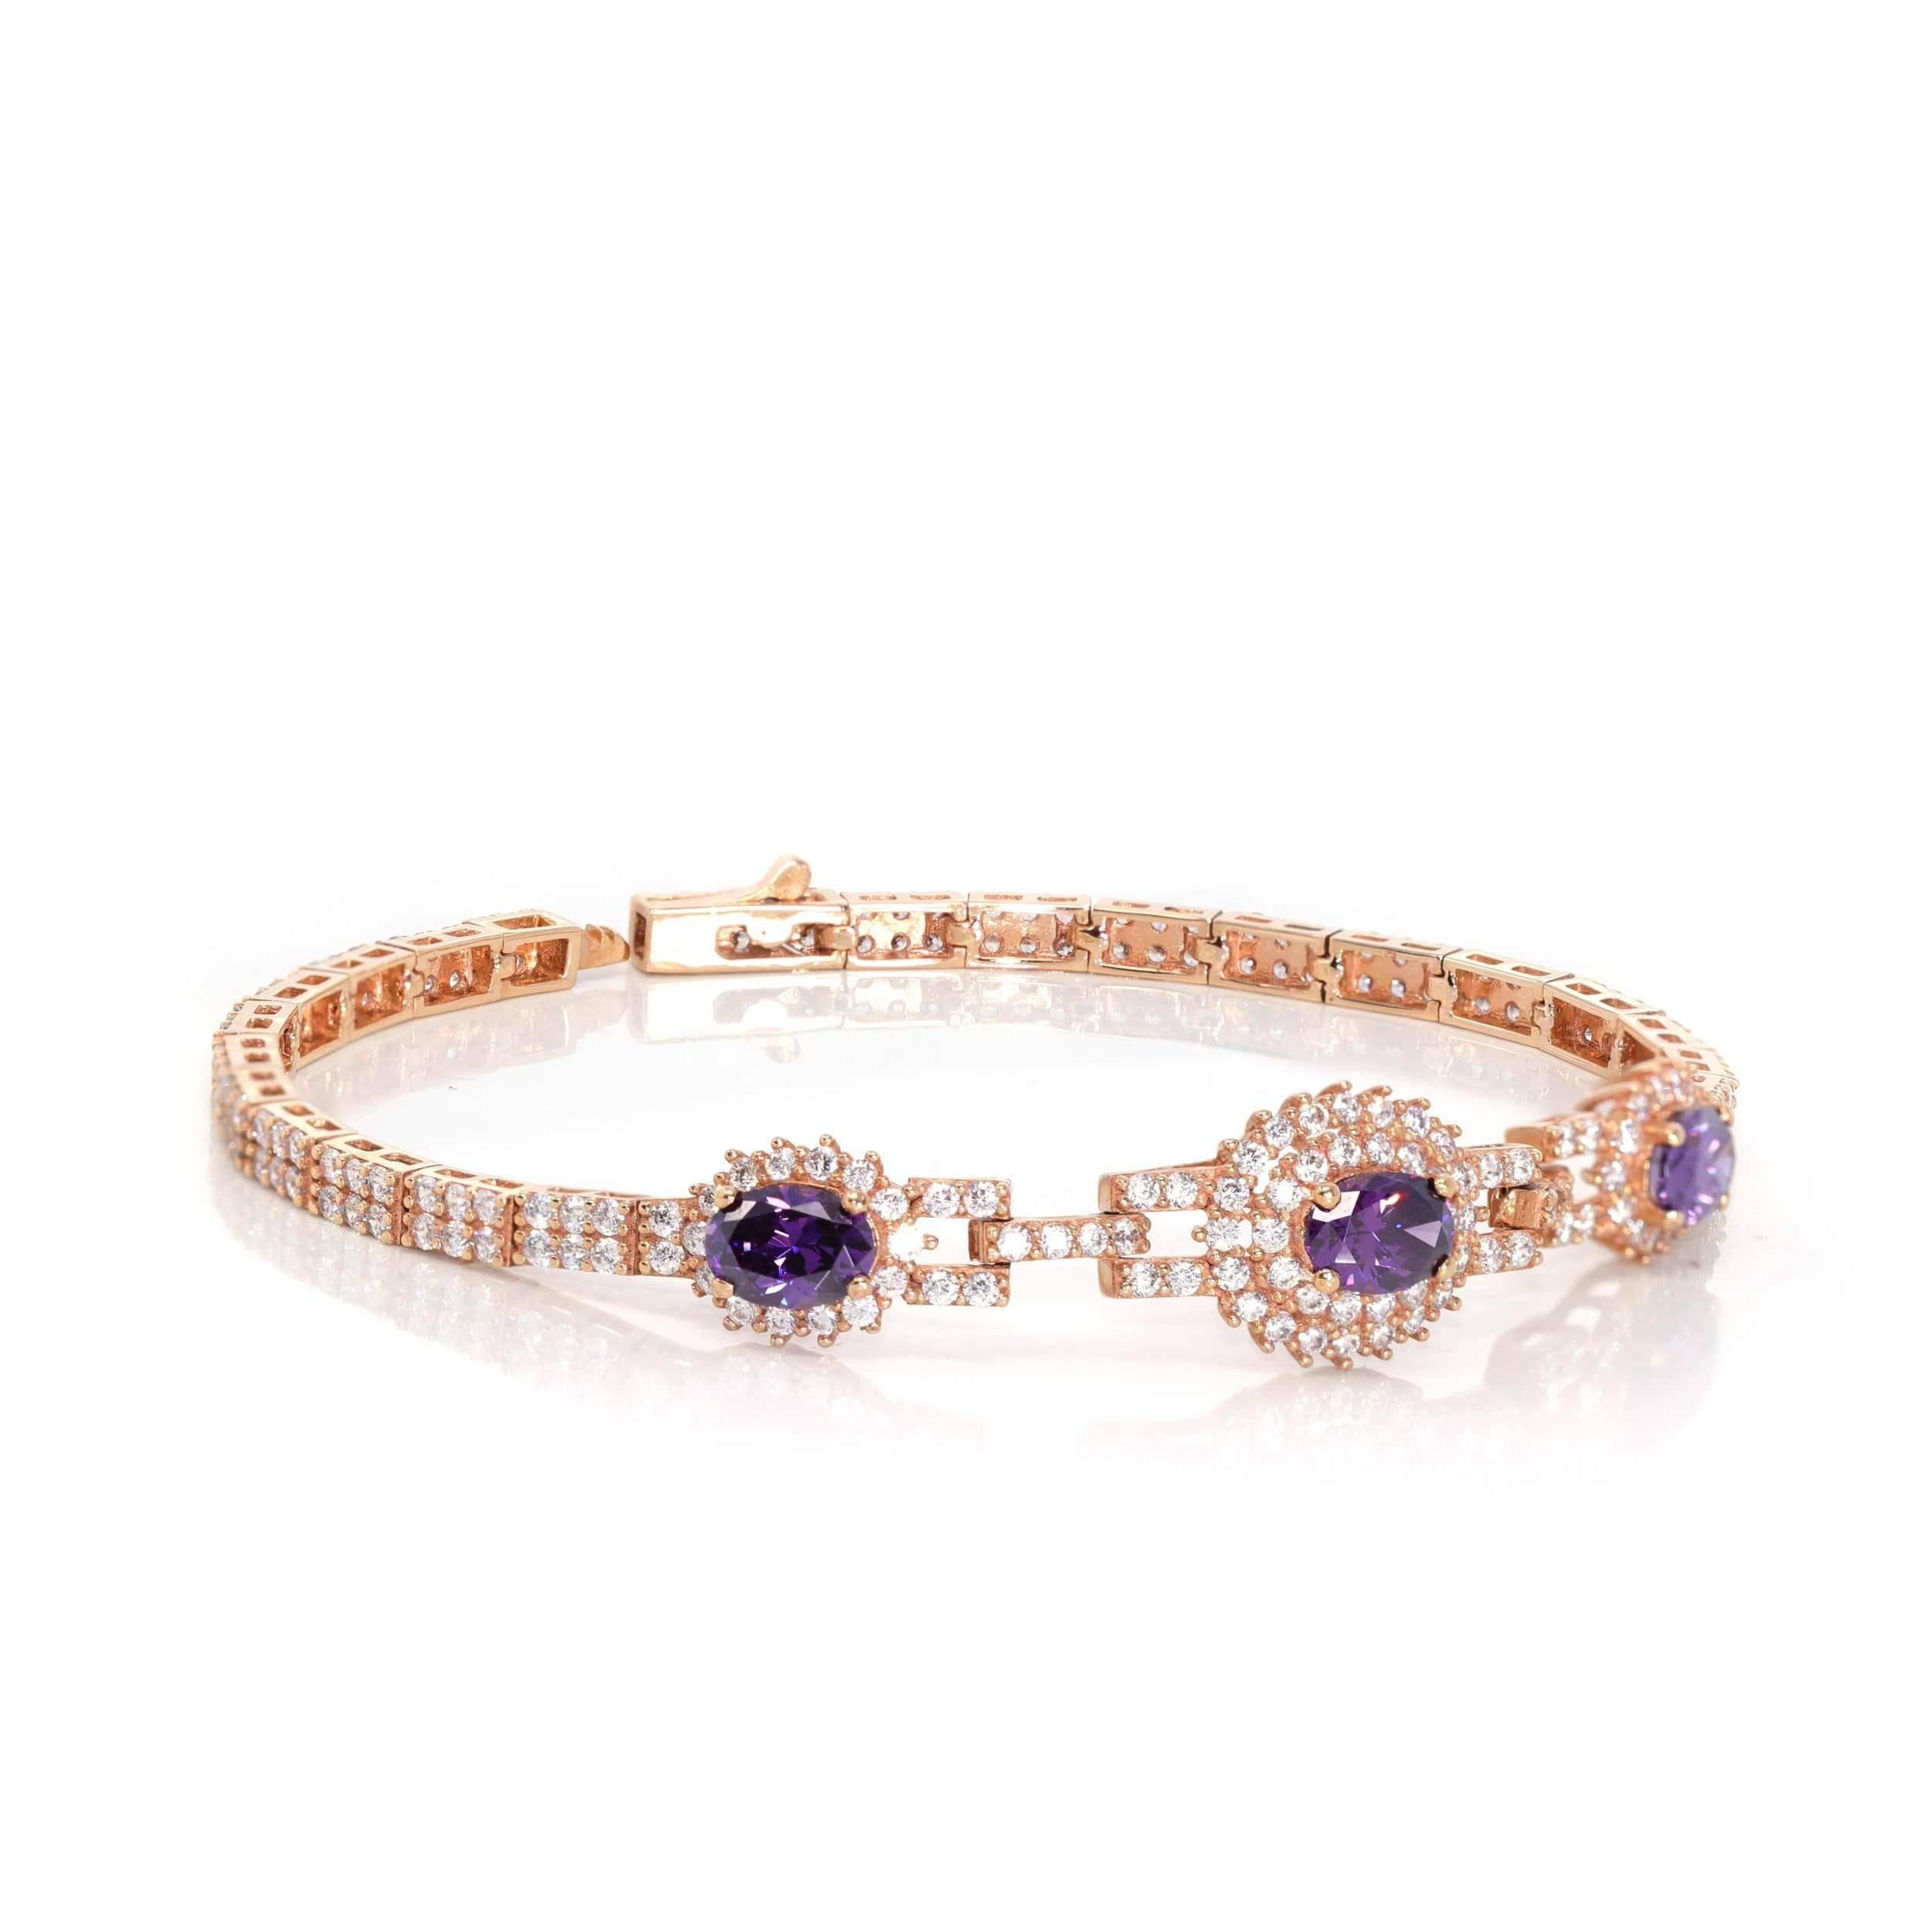 * DESIGN CONCEPT--- The design is inspired by the beauty of amethyst. Symbolizing life, prosperity, and good fortune. This 18k Rose Gold Genuine amethyst bracelet is a luxury you can wear daily. Made with three high-quality amethyst, surrounded by a